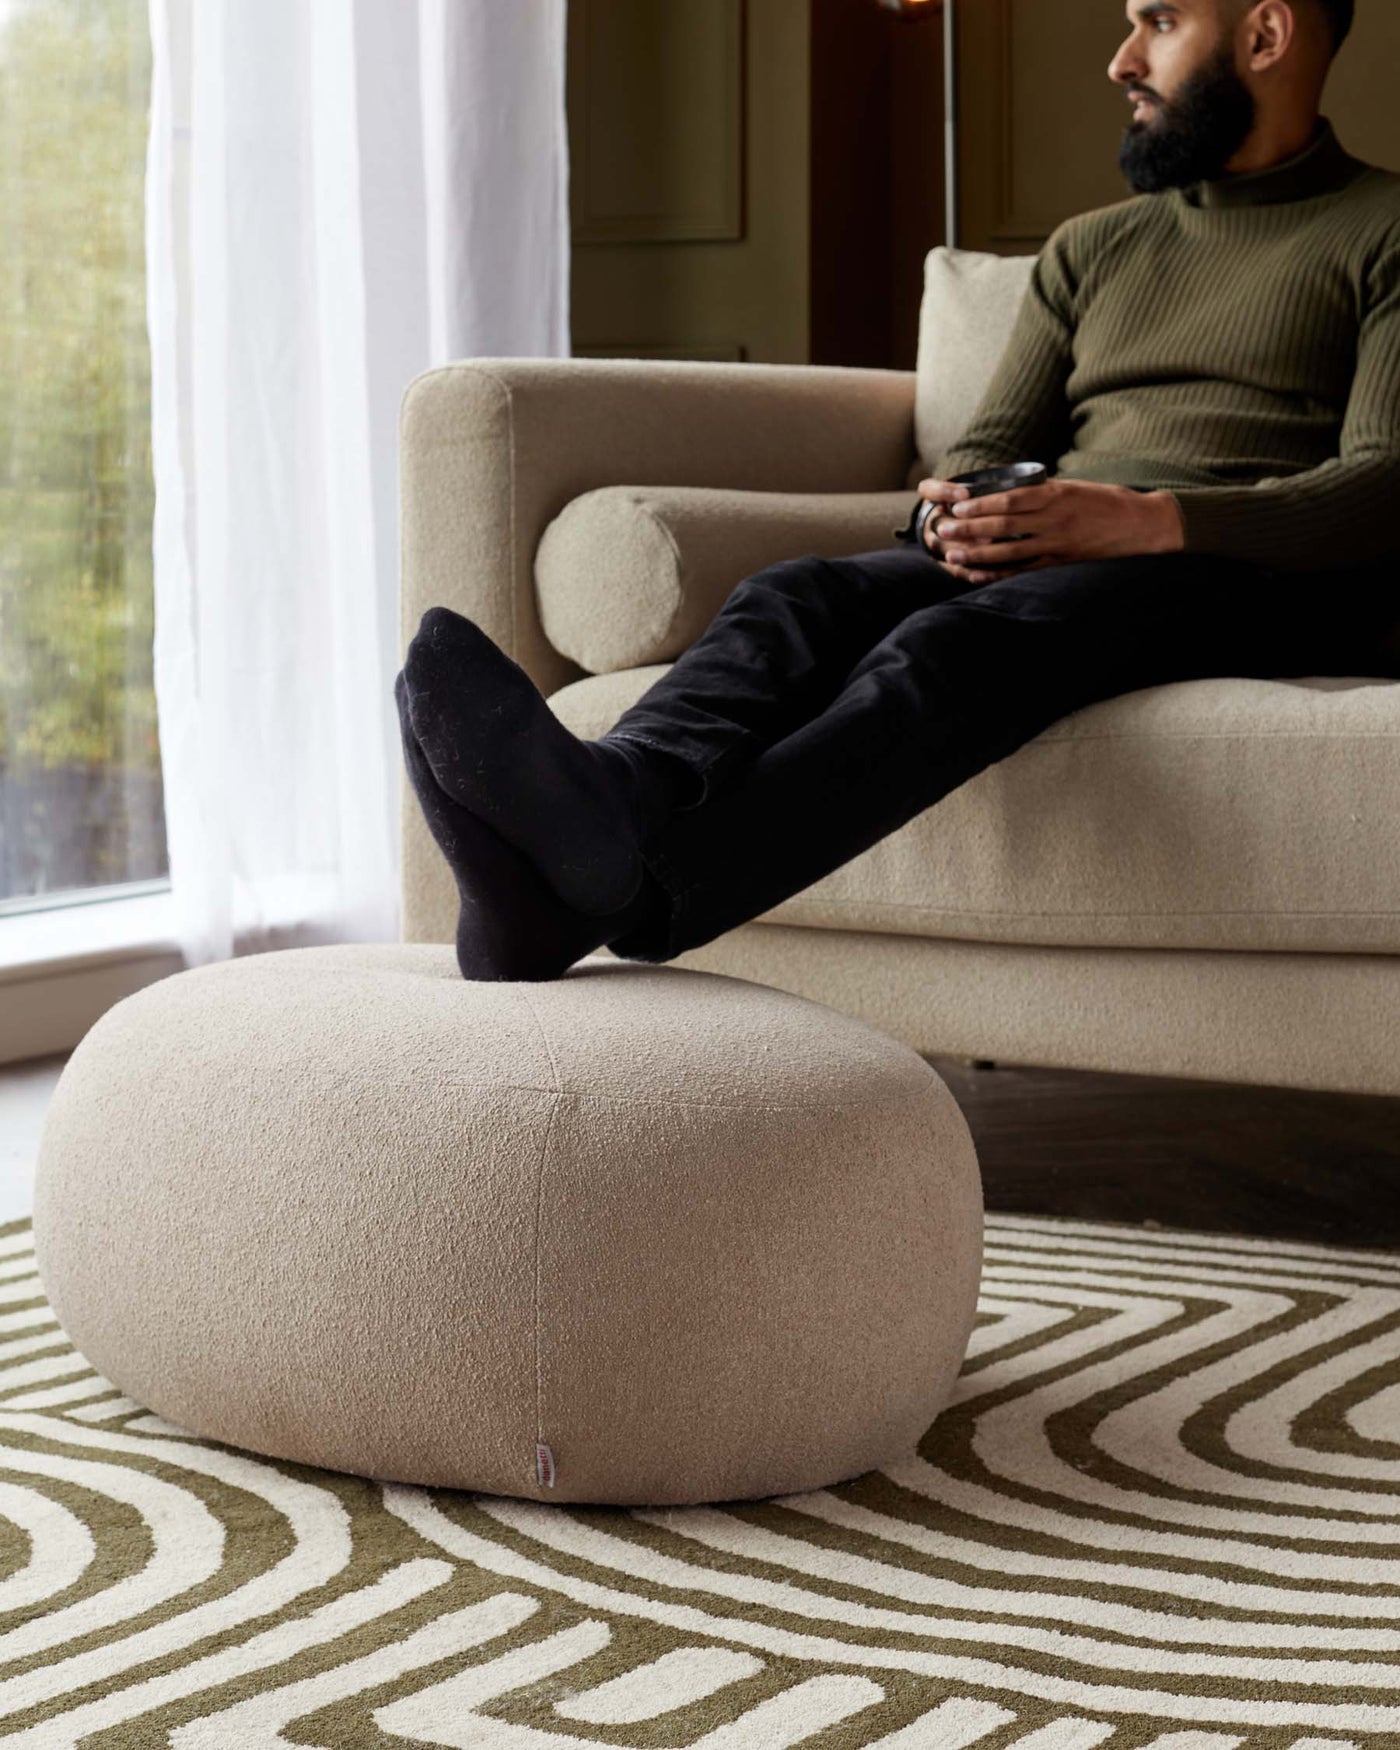 A modern beige fabric upholstered armchair with a matching circular ottoman on a patterned area rug. The armchair features a clean-lined contemporary design with plush cushioning, rounded armrests, and a snug backrest. The ottoman is a simple cylindrical shape, providing a comfortable footrest or additional seating option. Both pieces exhibit a minimalist aesthetic with a focus on comfort and style.